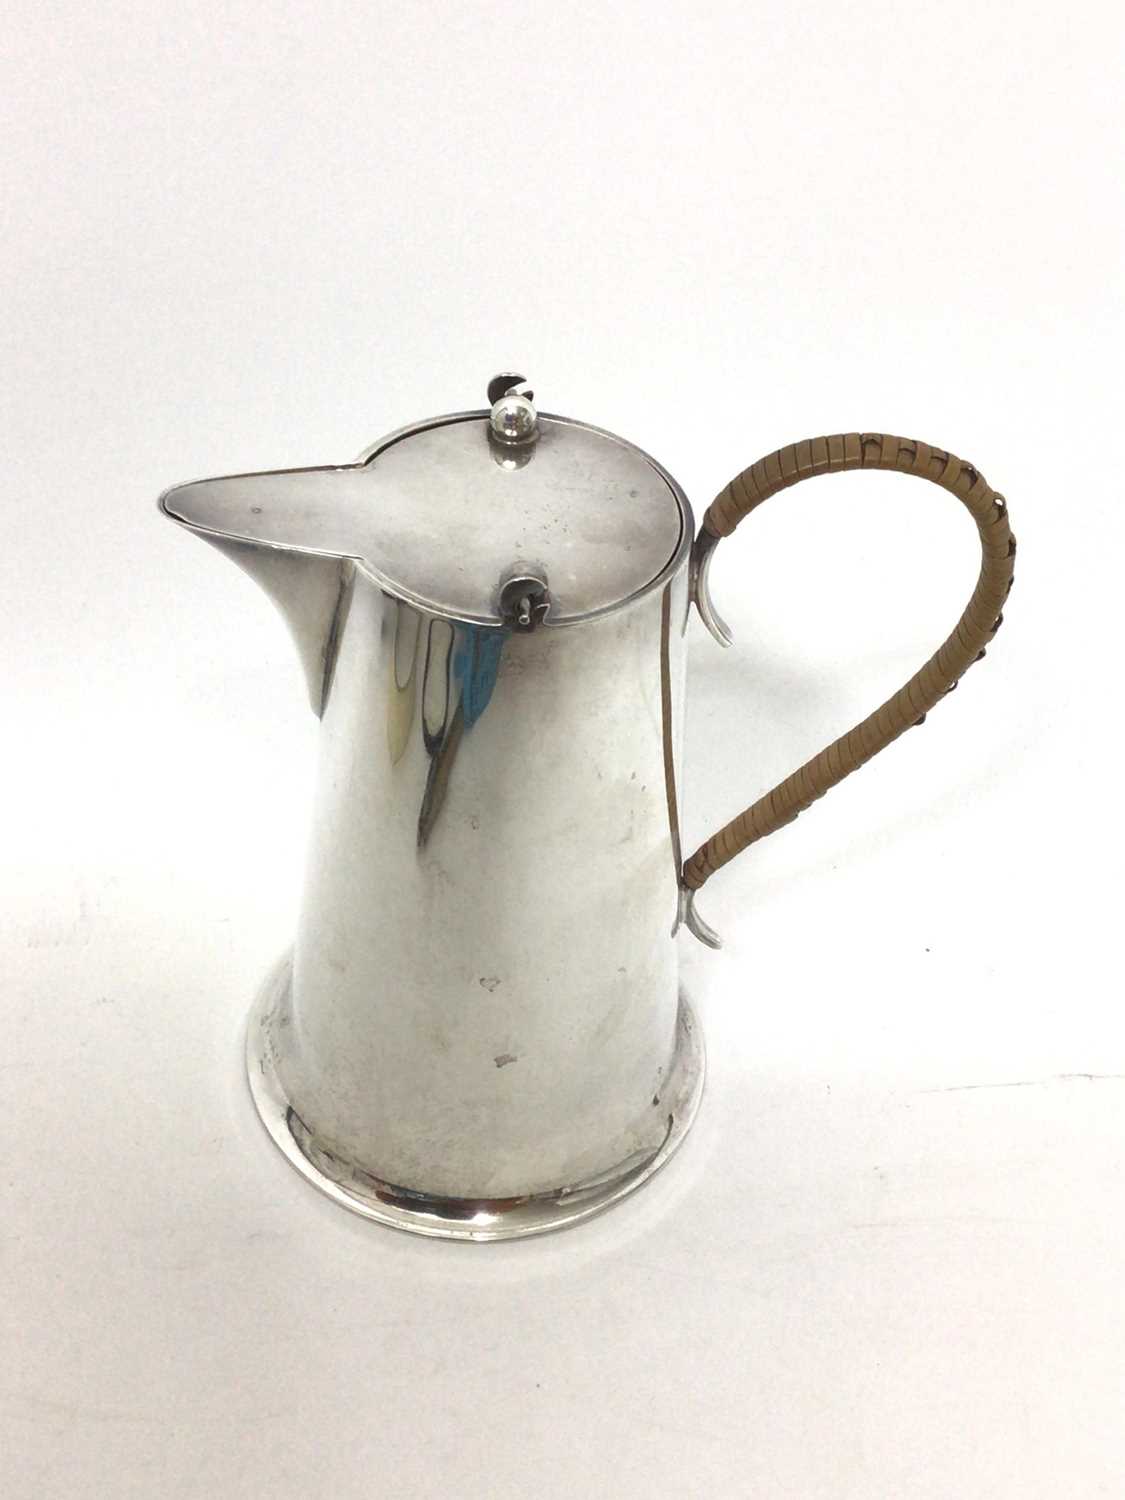 Lot 52 - Arts & Crafts silver water pot with gimbled hinged lid and caned handle by Barker Bros. (Chester 1926)